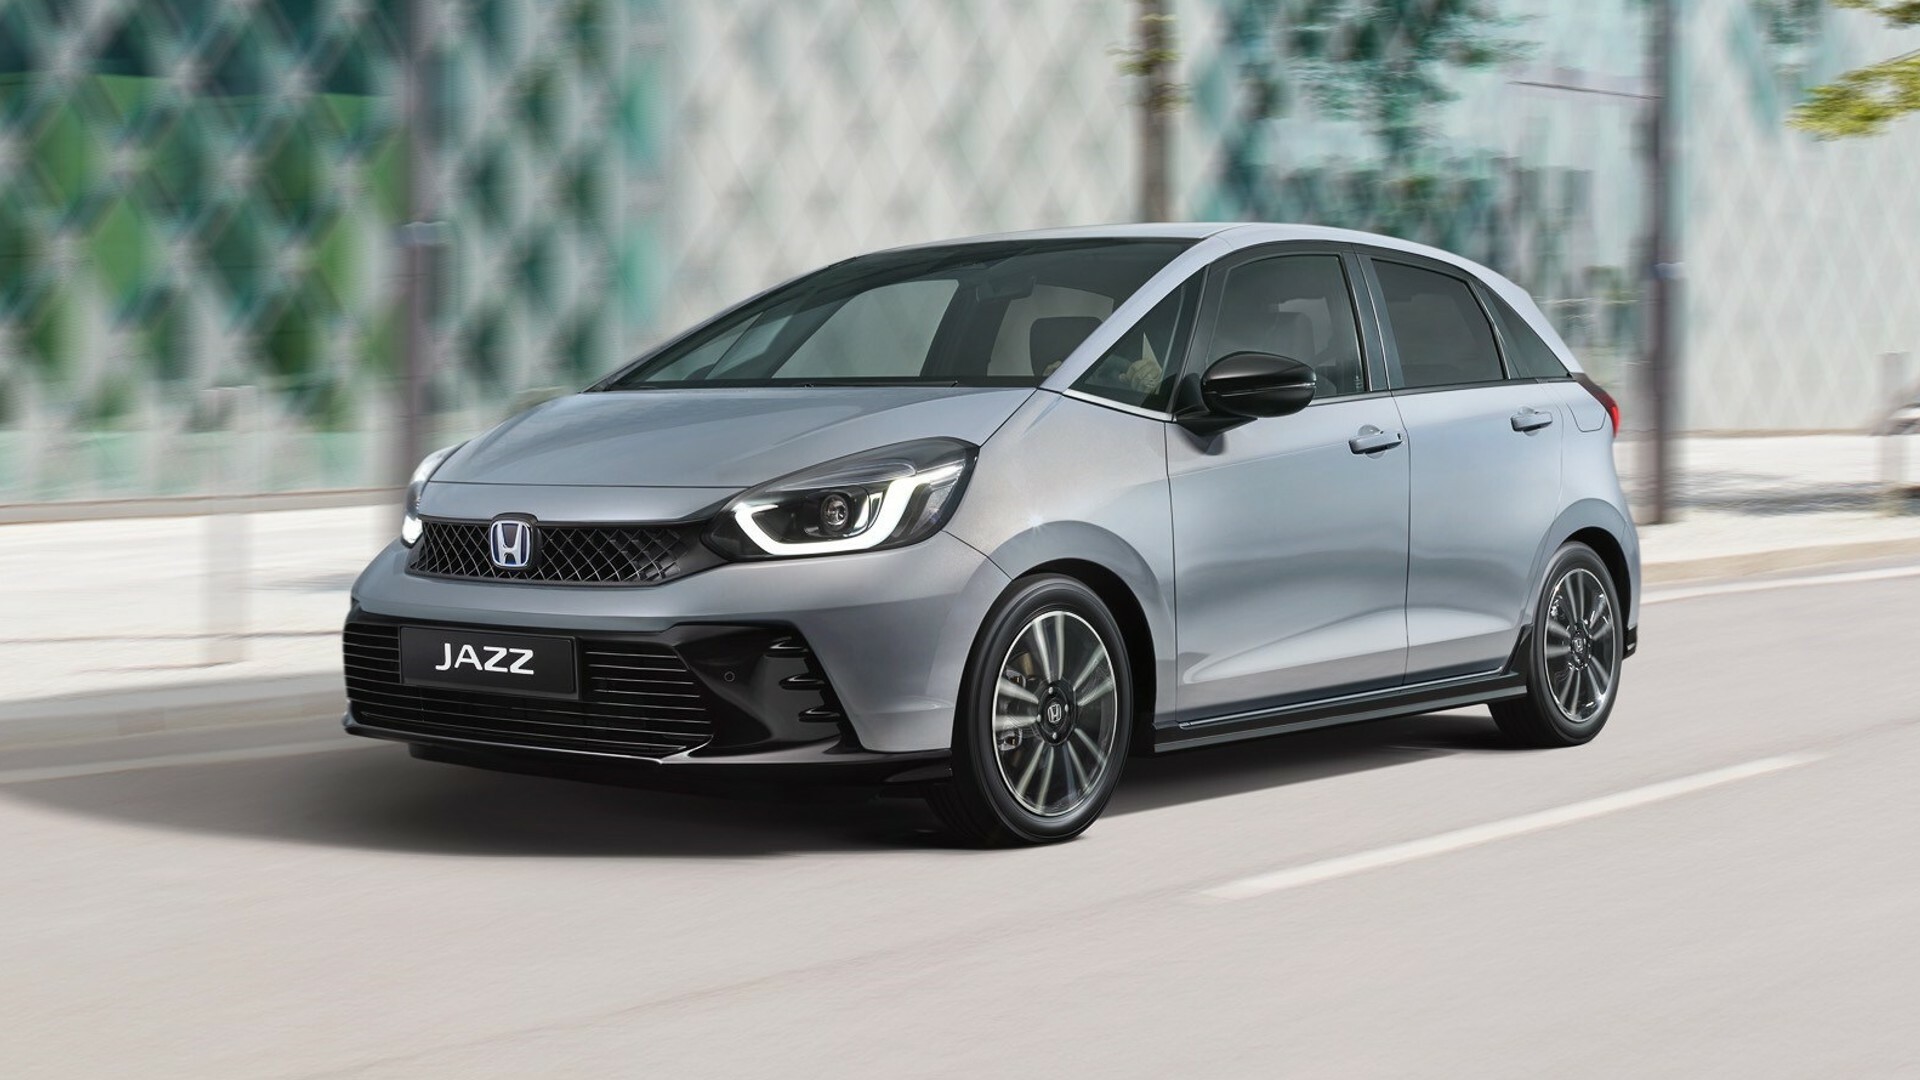 Facelifted Honda Jazz eHEV Arrives In Europe With More Power And New